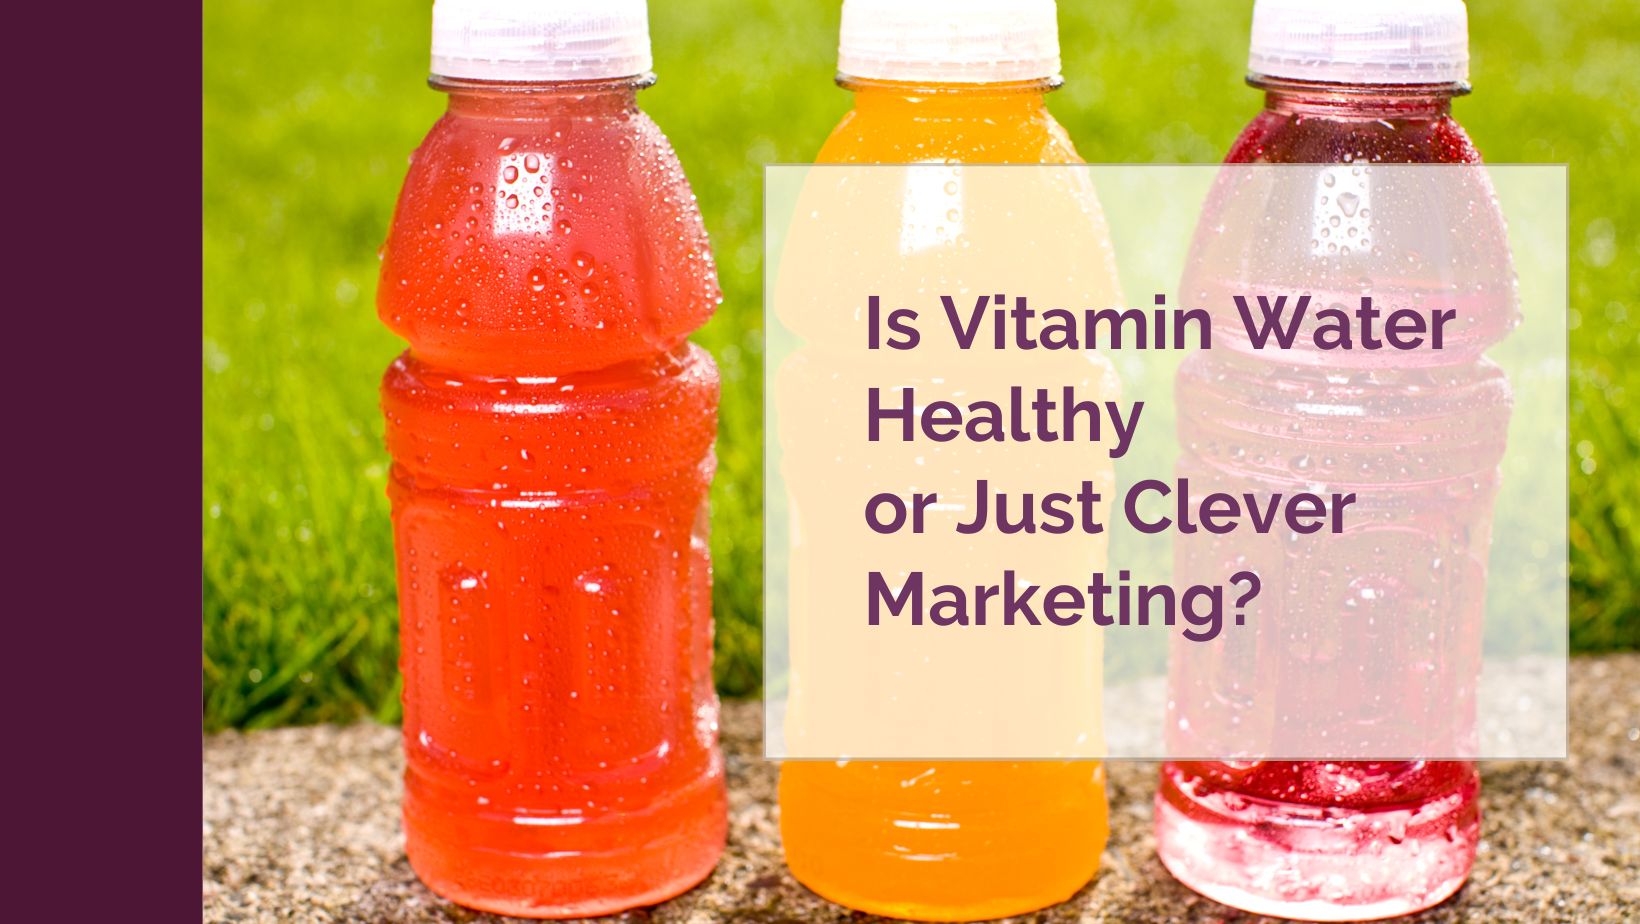 Is Vitamin Water Healthy or Just Clever Marketing?